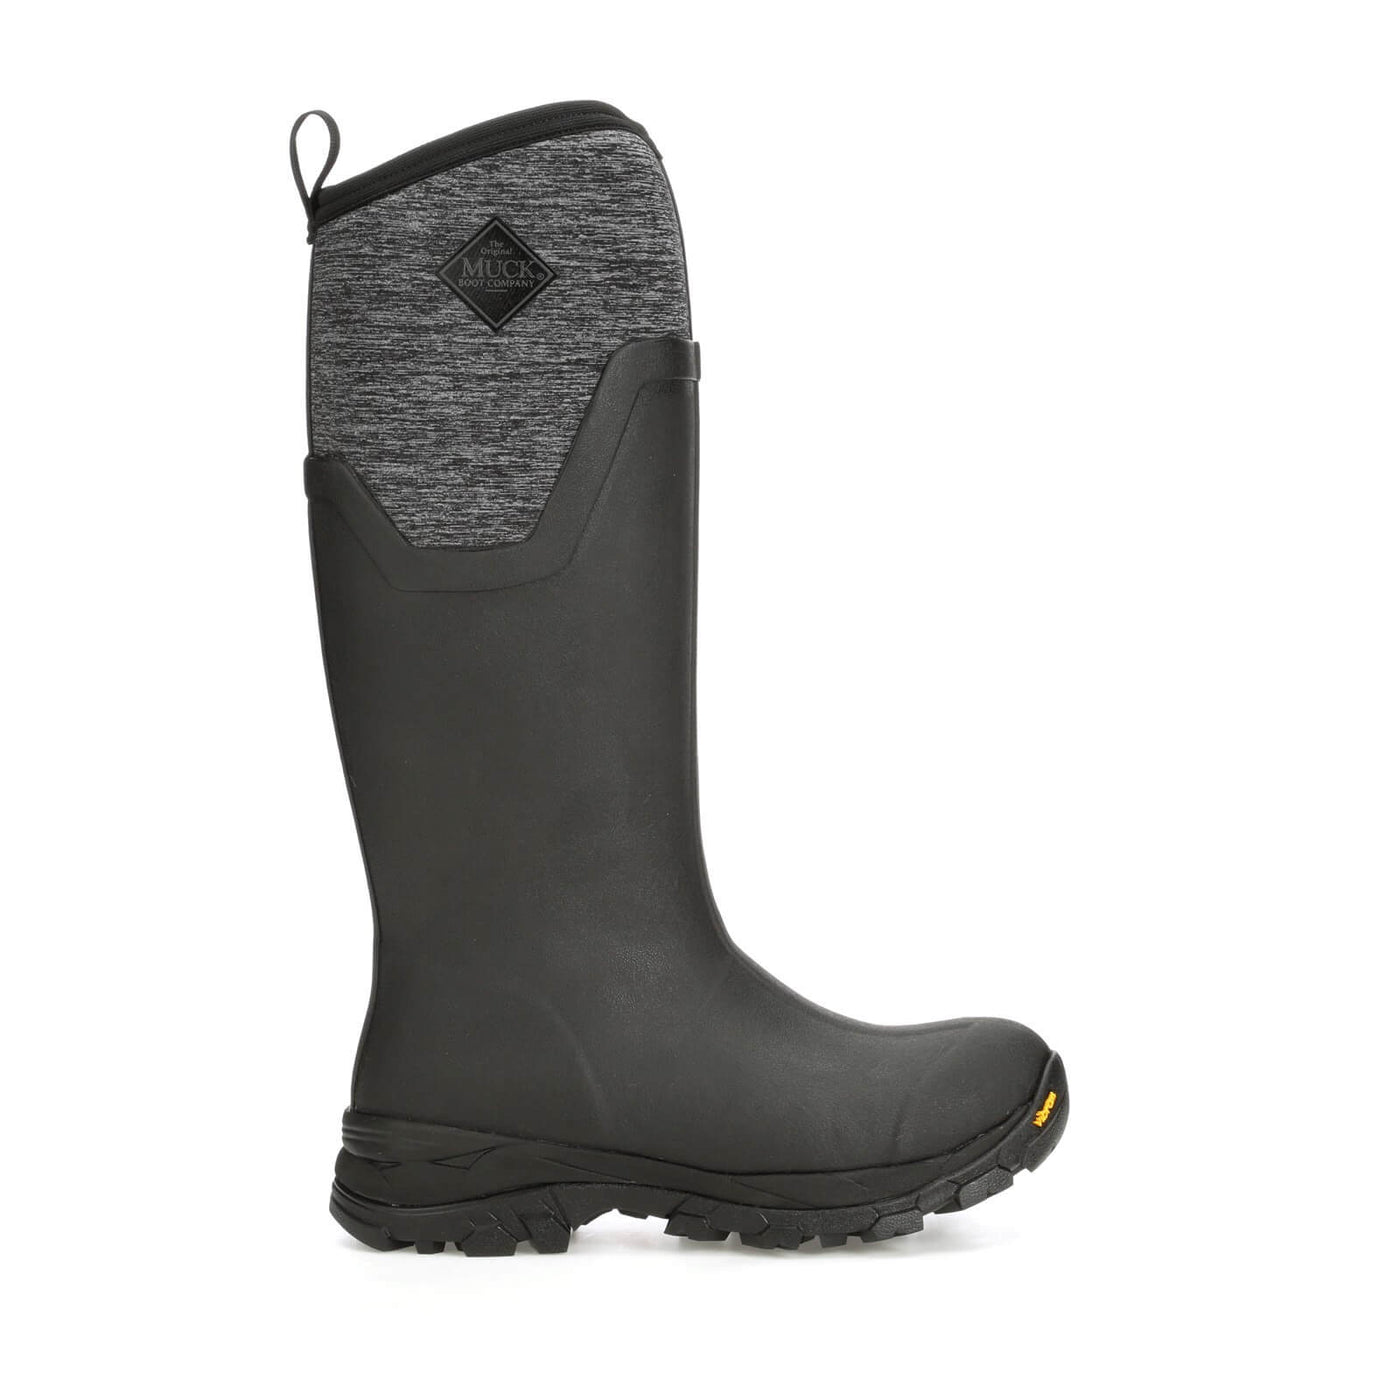 Muck Boots Arctic Ice Tall Wellington Boots Black/Jersey Heather 8#colour_black-jersey-heather